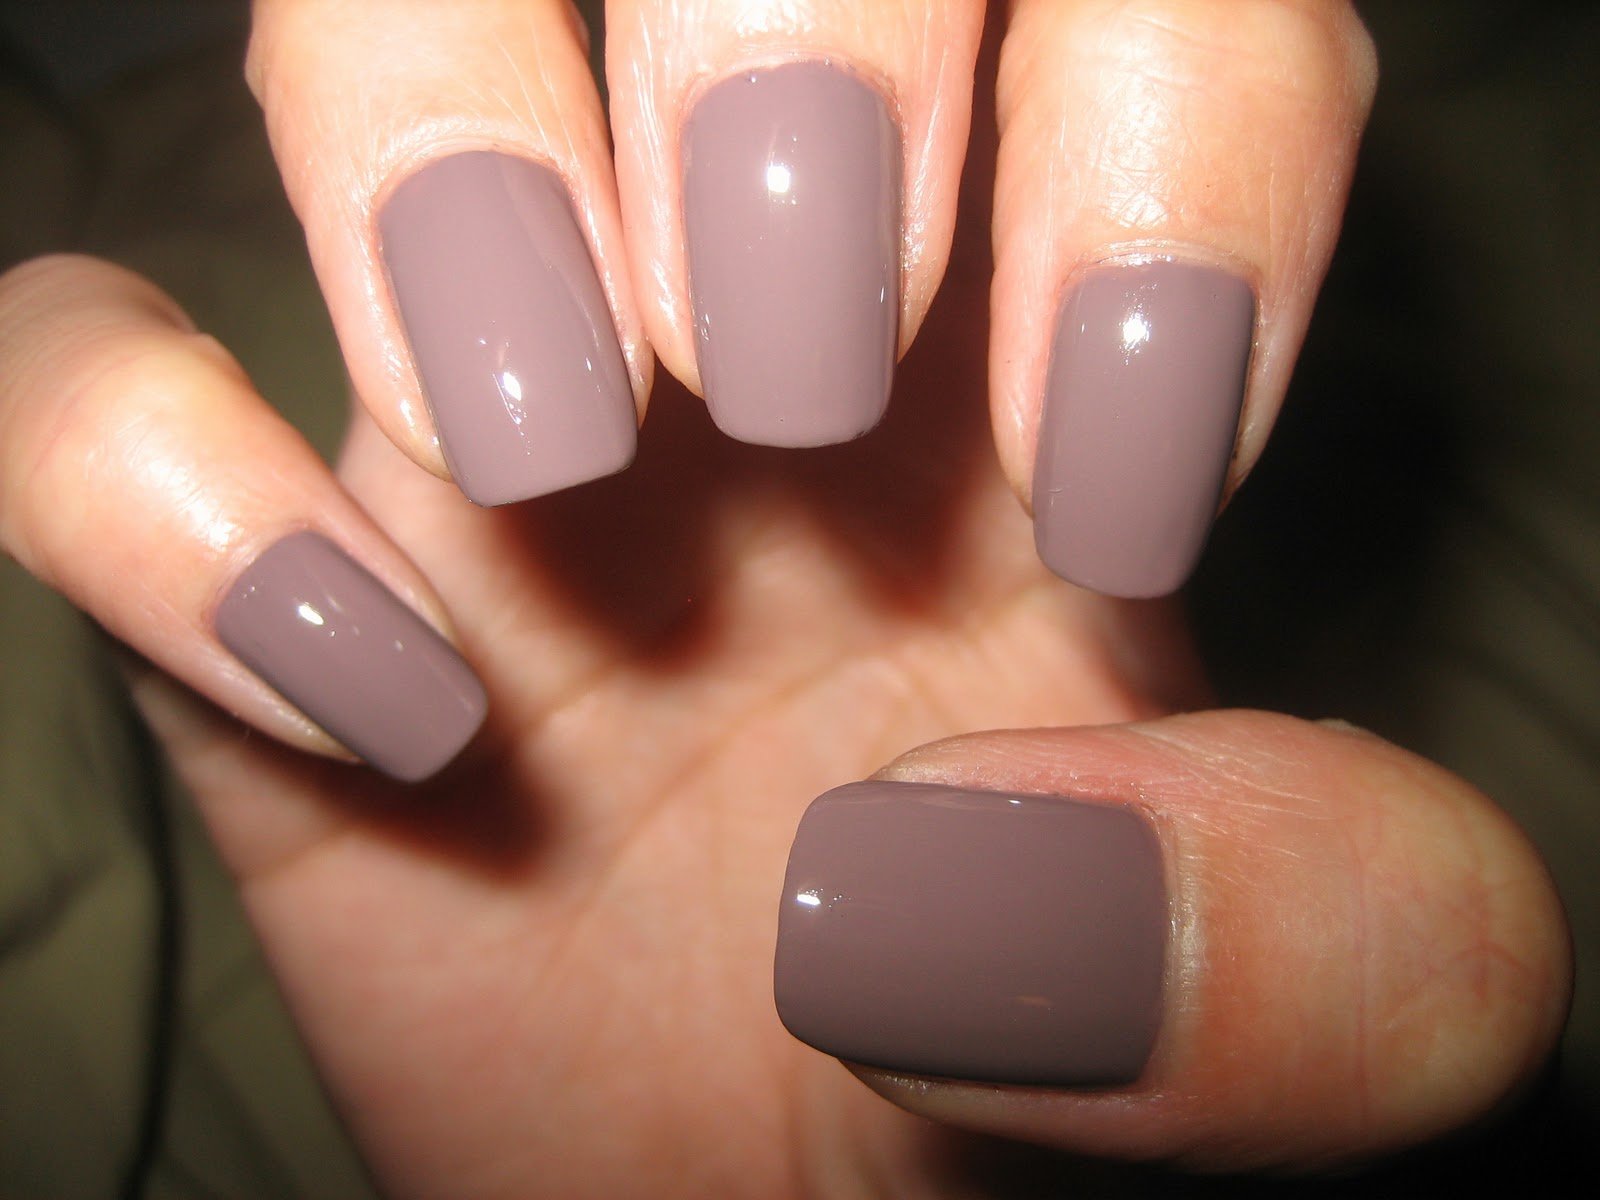 10. "November Nail Ideas: Designs and Colors to Match Your Thanksgiving Outfit" - wide 5